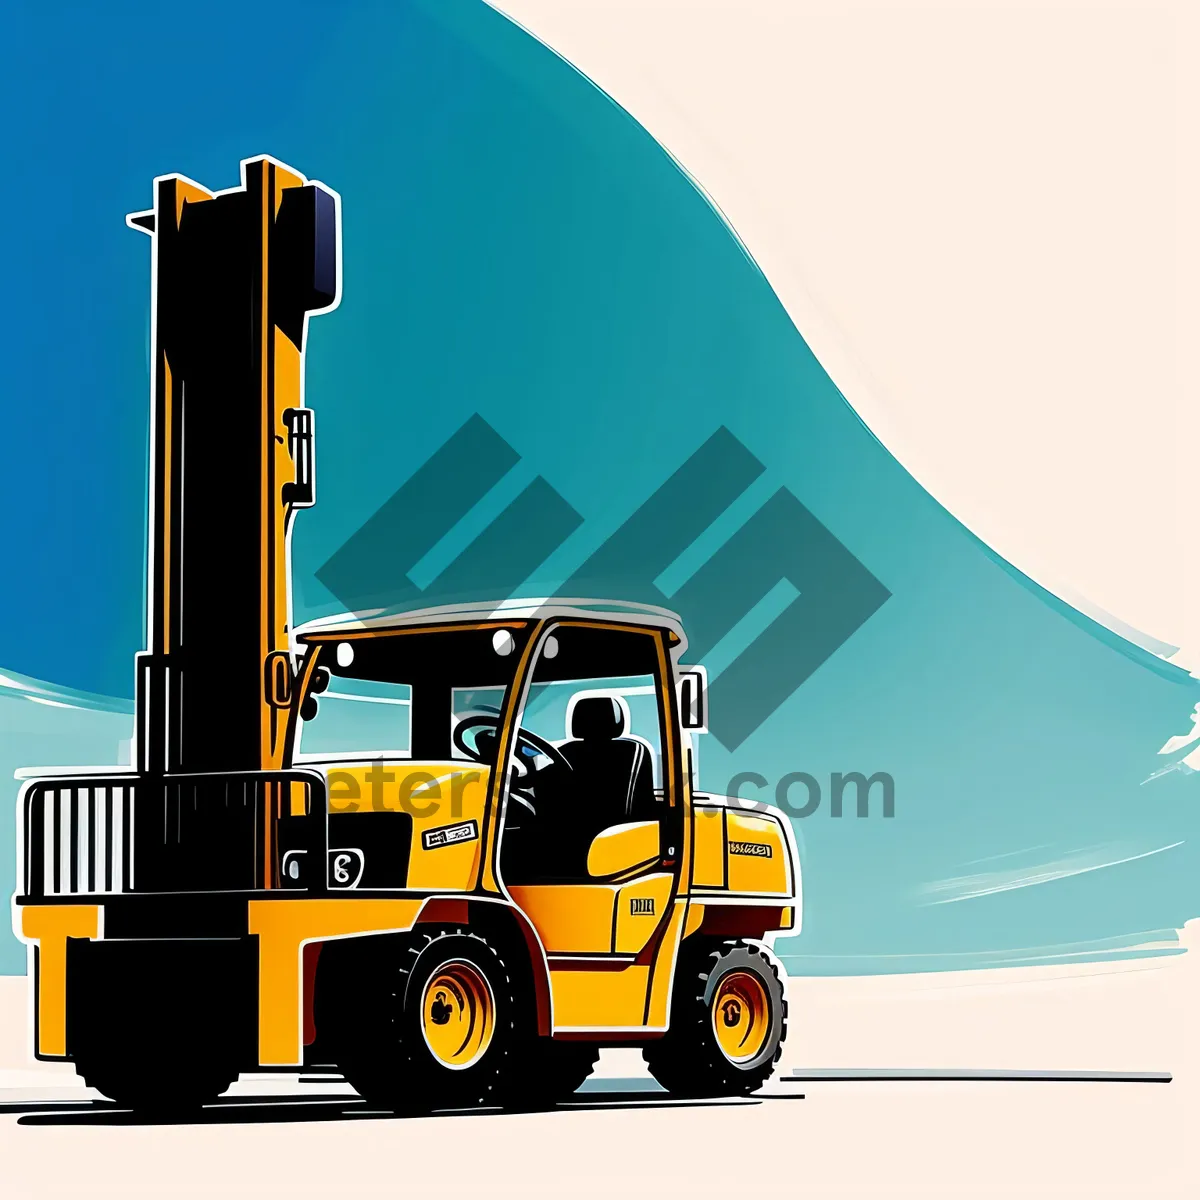 Picture of Yellow Heavy Duty Forklift Loader at Construction Site